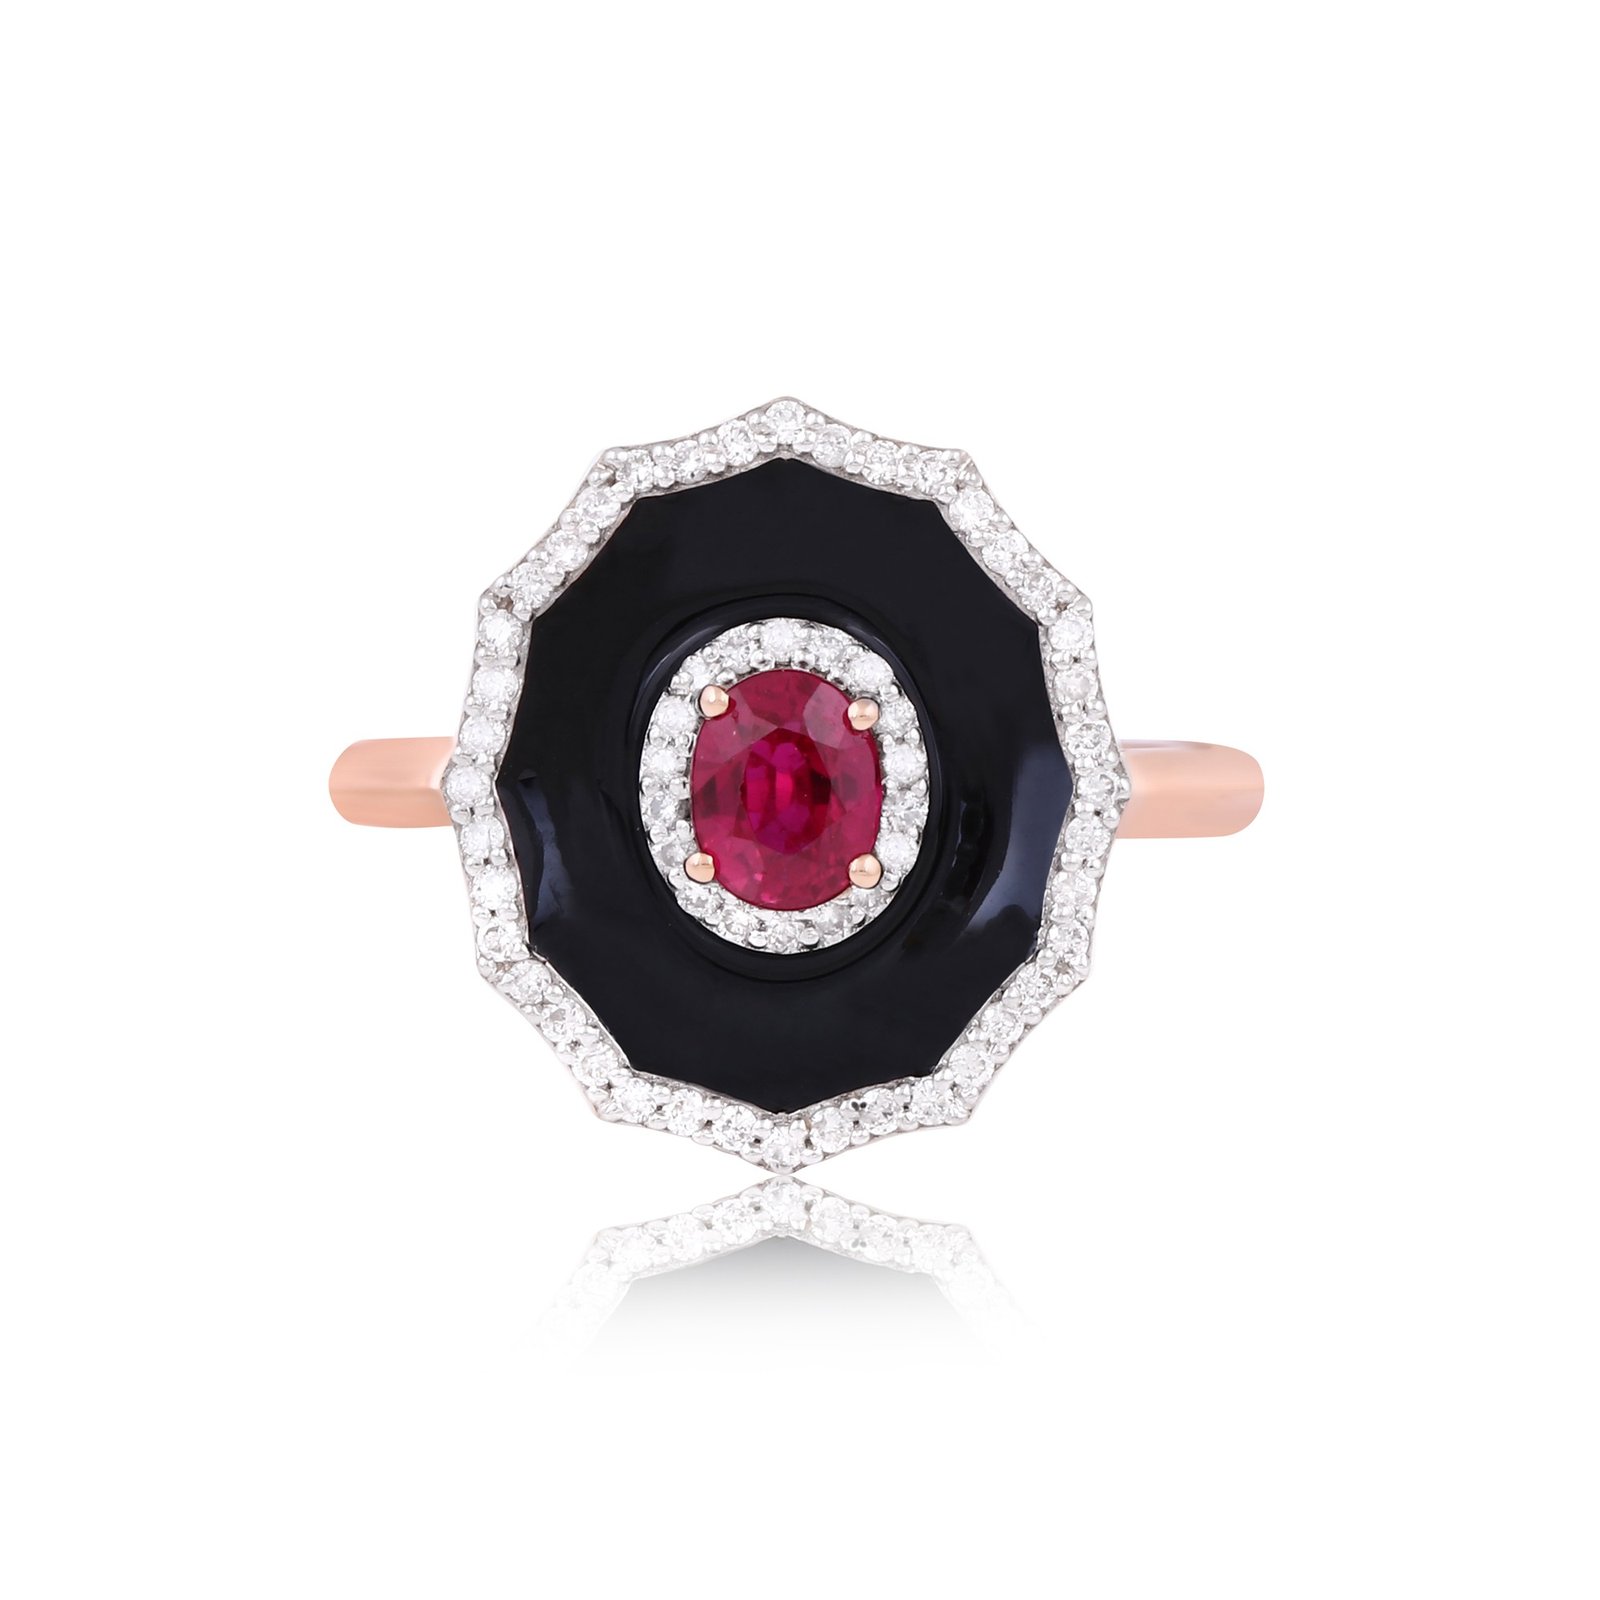 10X8mm INDIA RUBY AND CZ RING Rhodium / Sterling Silver 925 NWT Size 9 RG6  | eBay